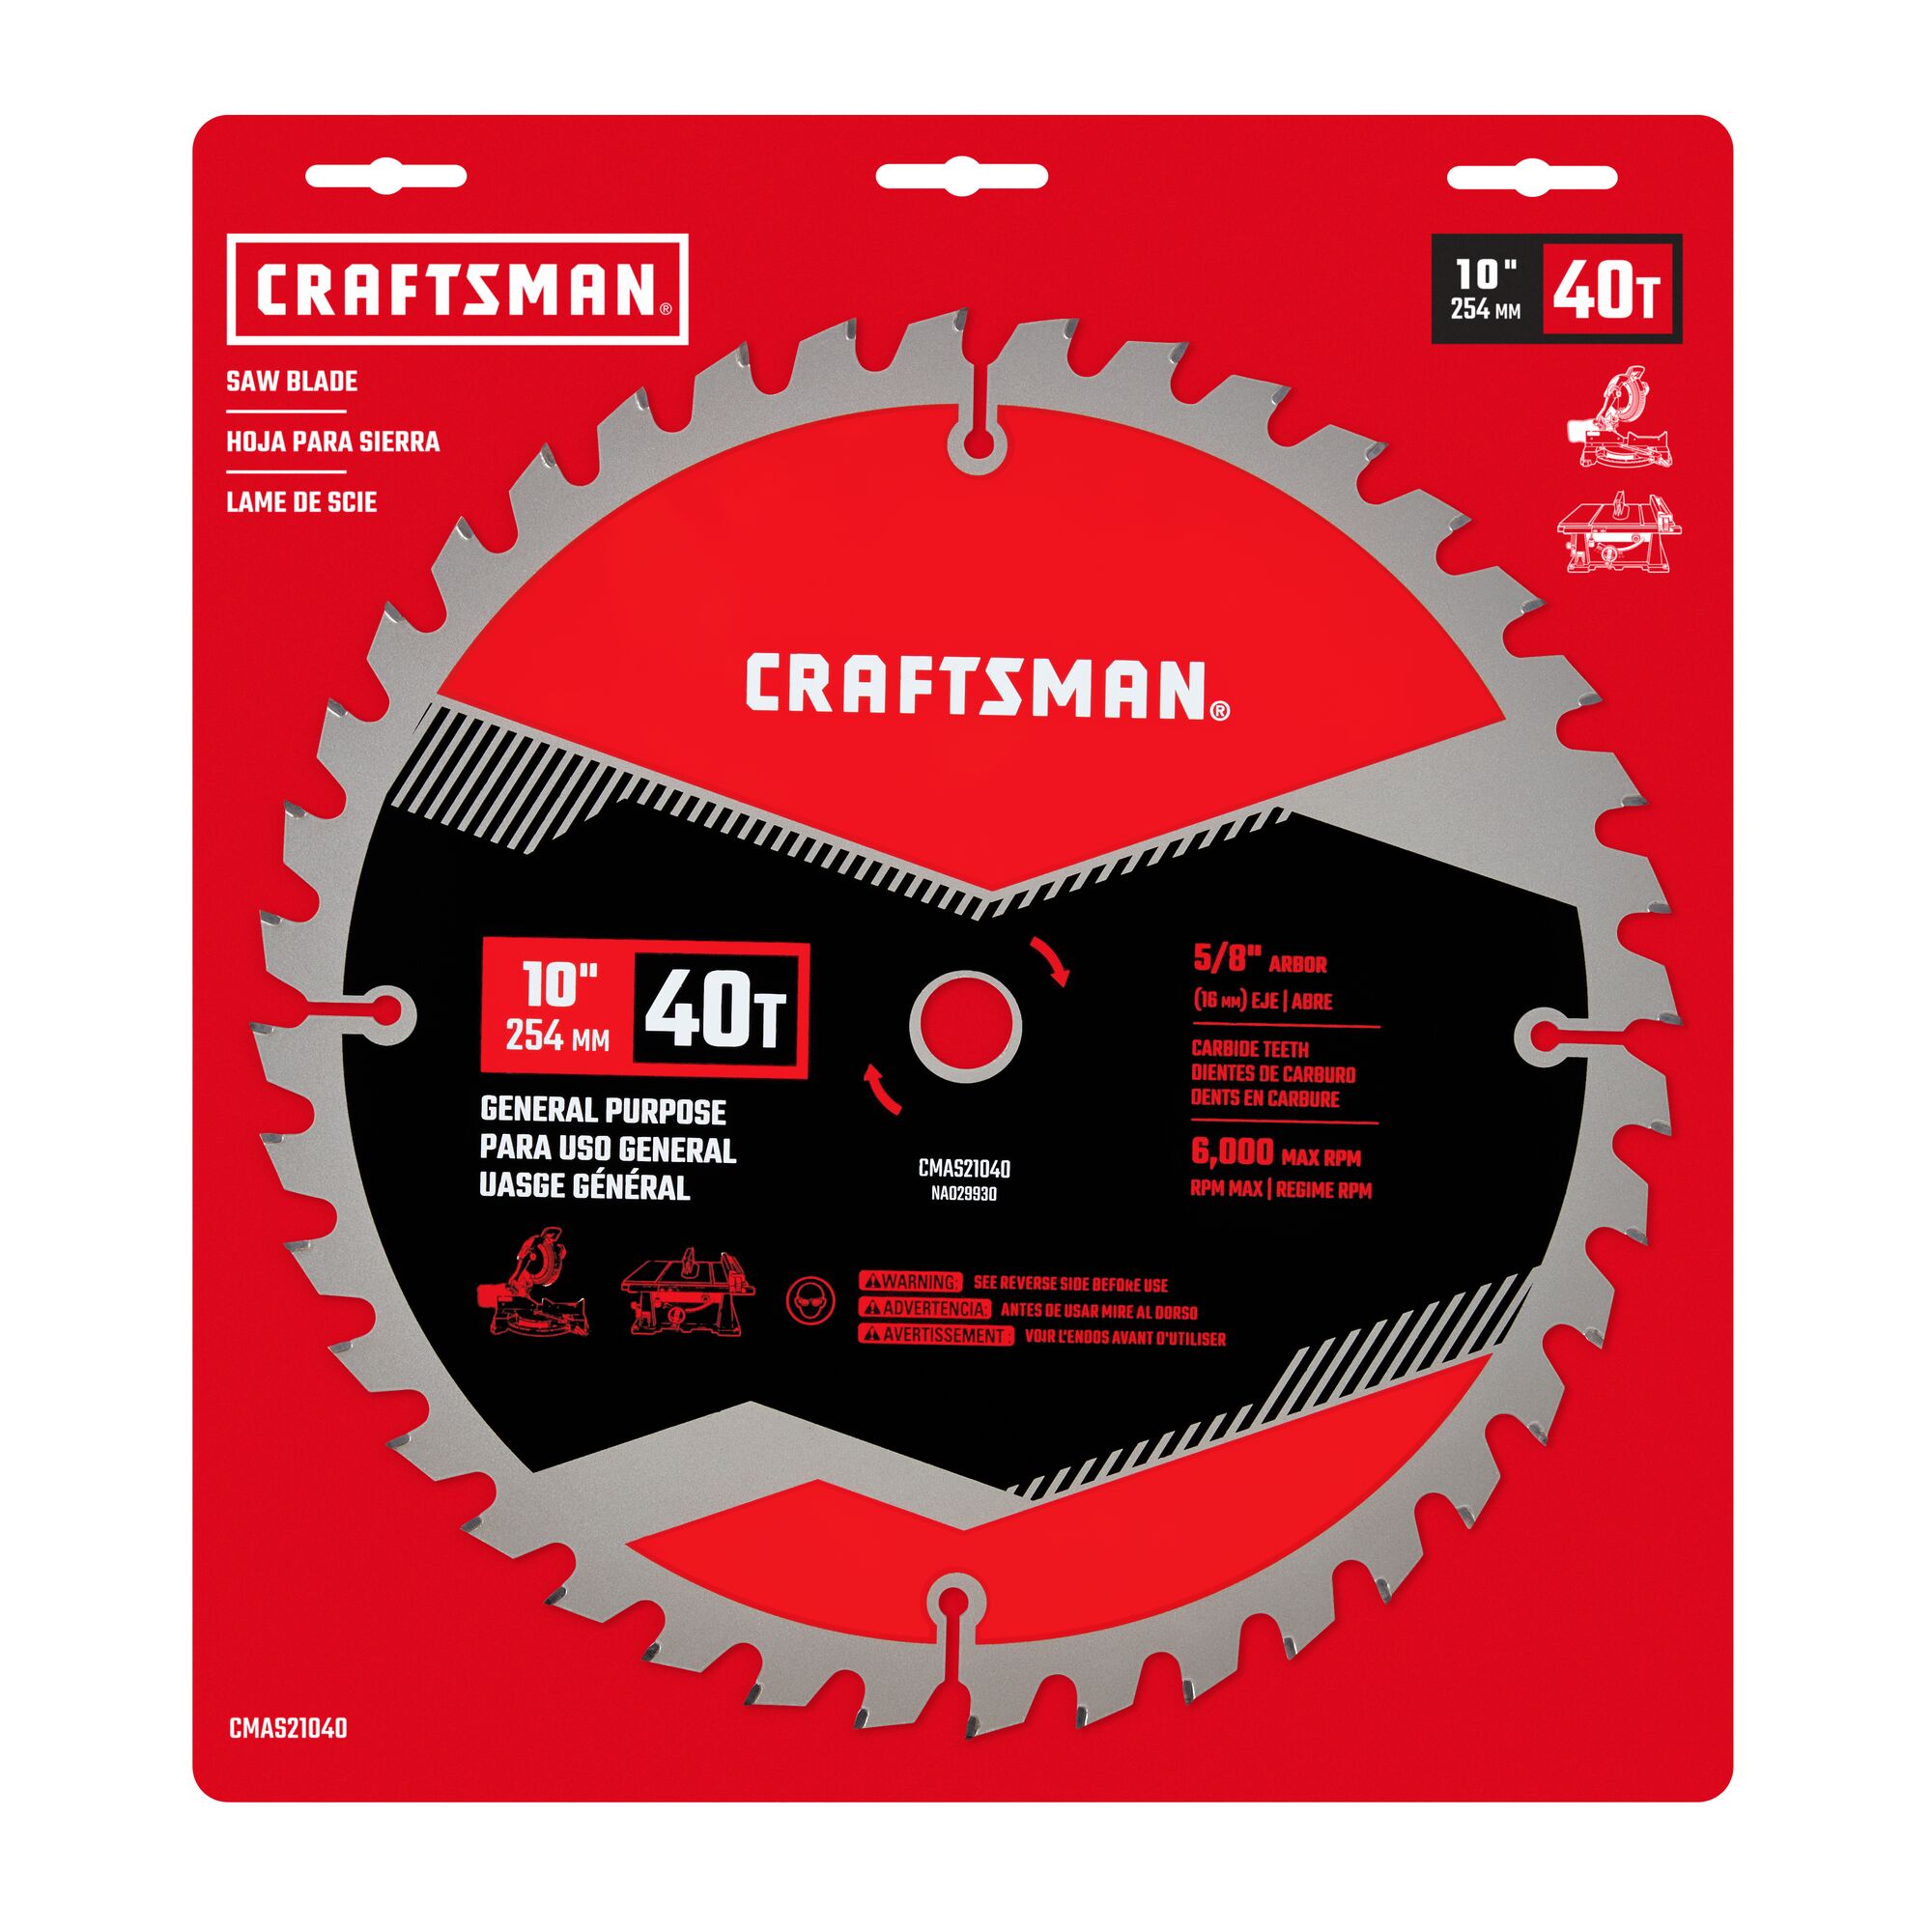 View of CRAFTSMAN Blades: Table Saw packaging